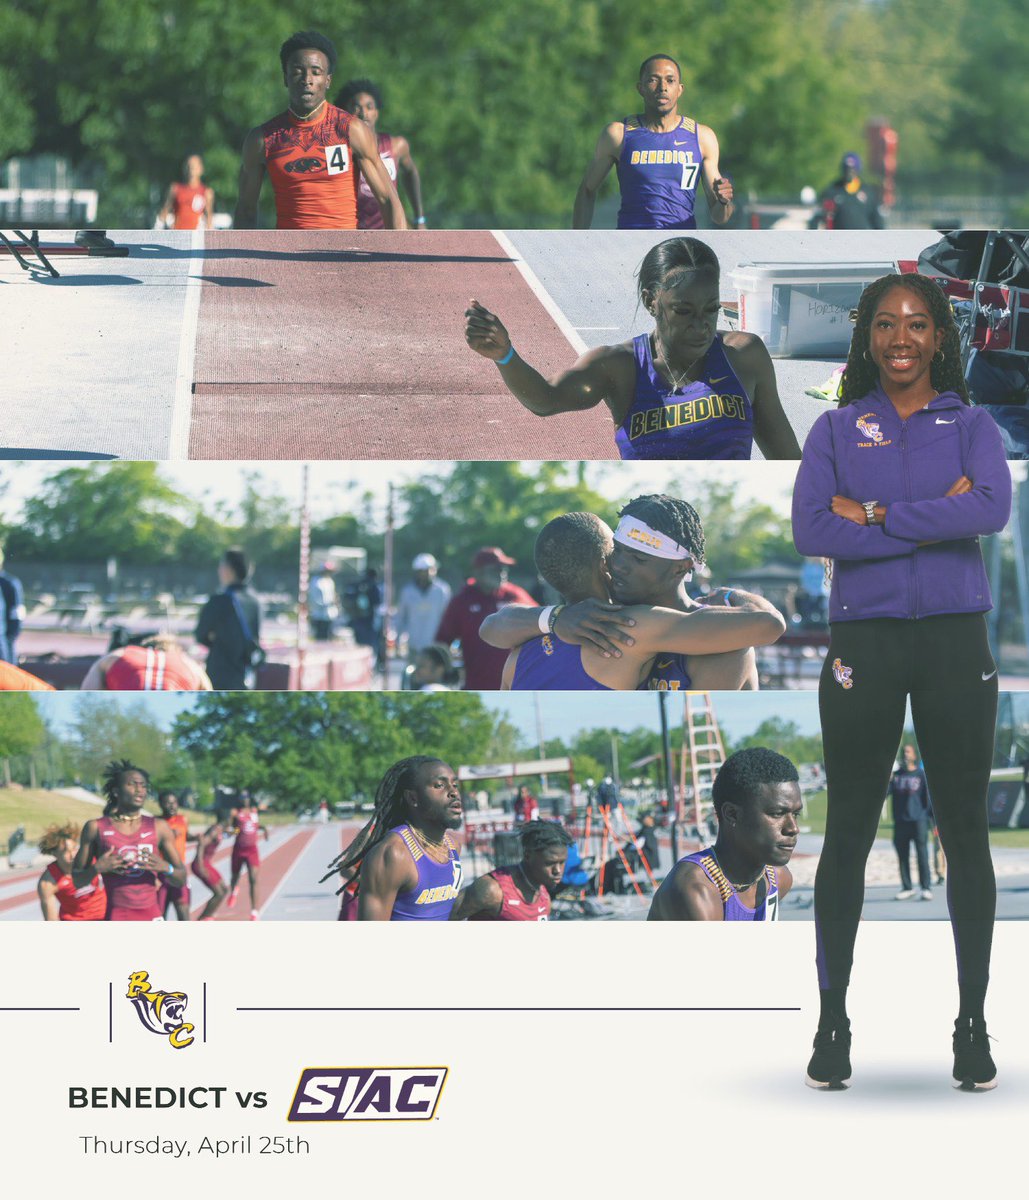 Wish @benedicttigers_tfxc luck as they compete against the rest of the @thesiac April 25th-27th @theSIAC // @benedicttigers_tfxc // #thebestofbc